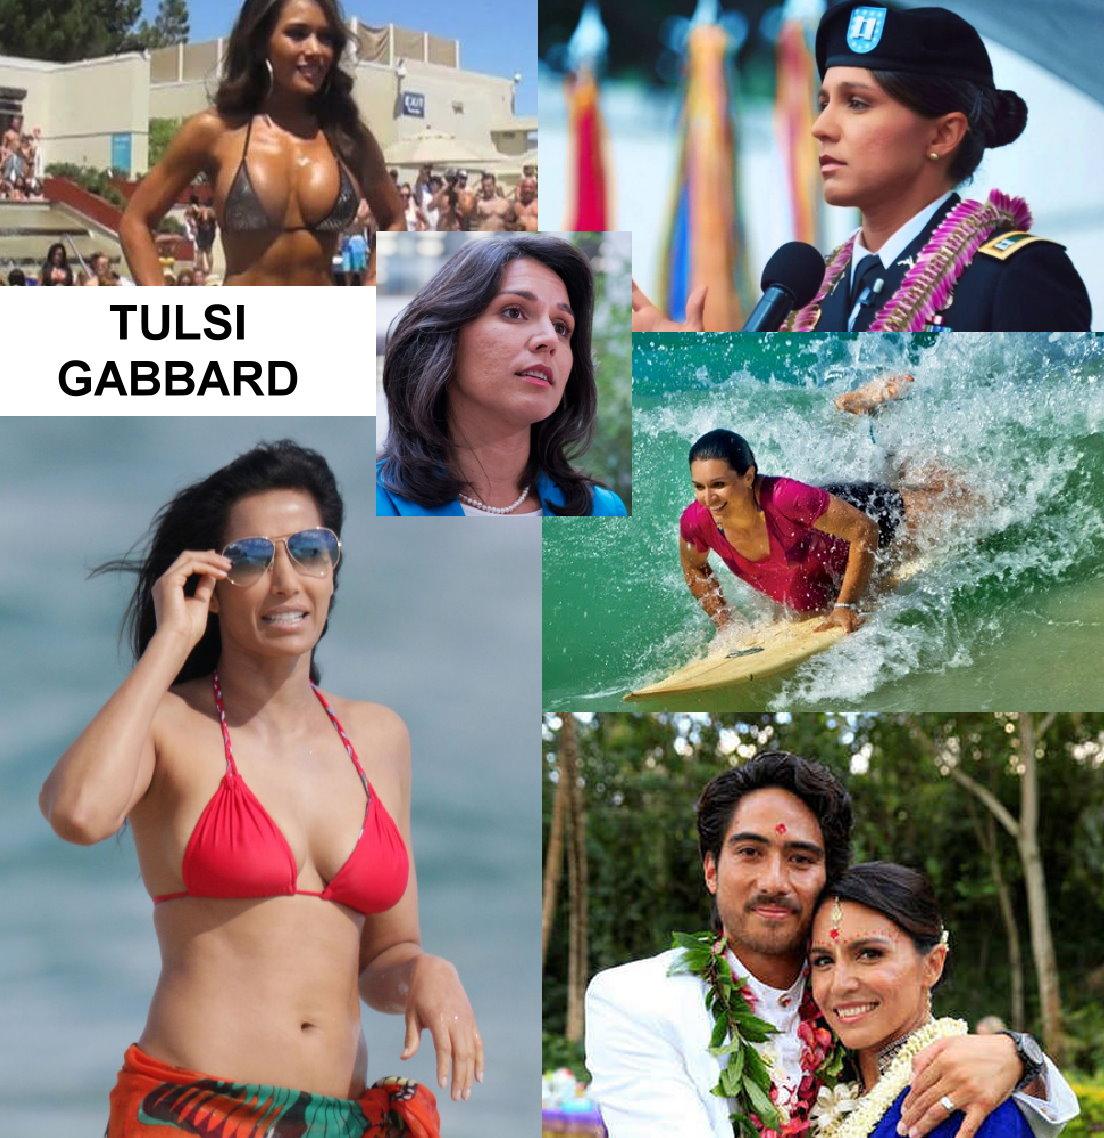 Even NOW it will show up in a Google Search for "Tulsi Gabbard Bikini&...